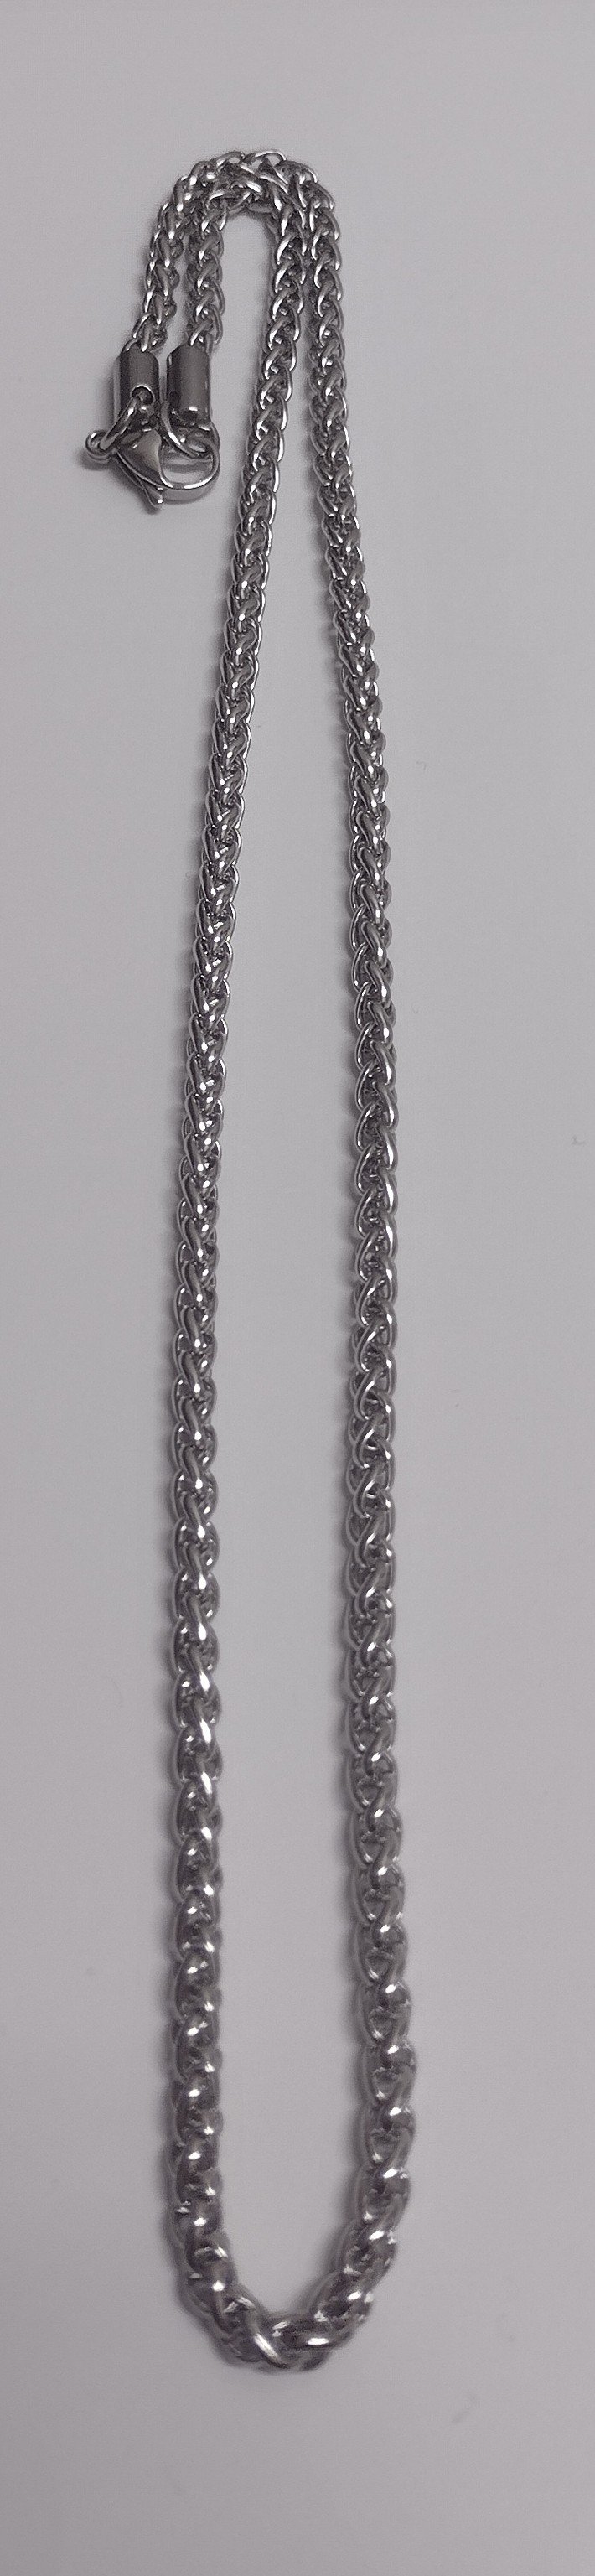 Image of 22 INCH CHAIN